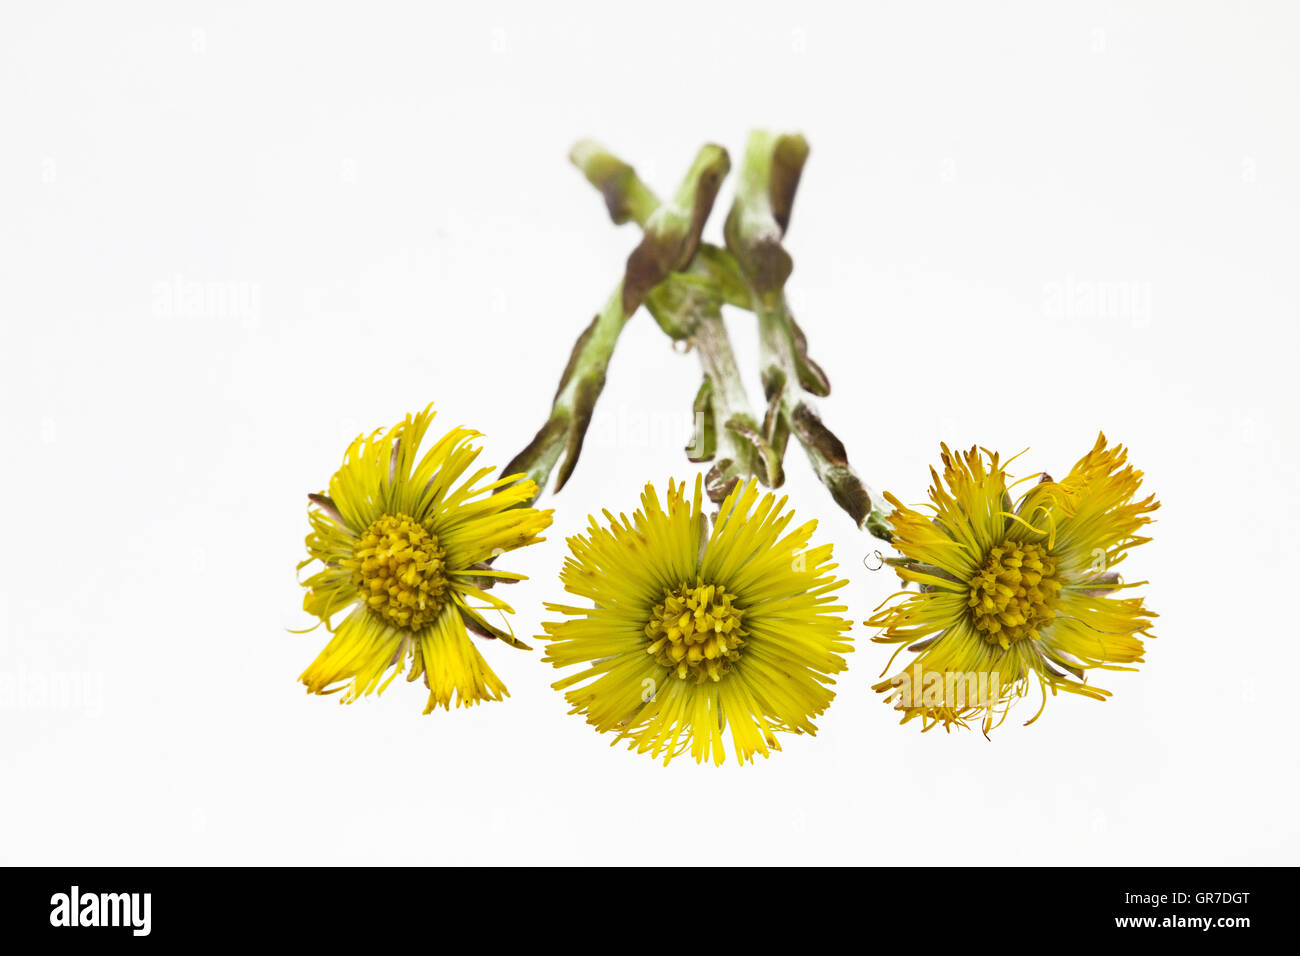 Coltsfoot From The Sunflower Family On White Background Stock Photo